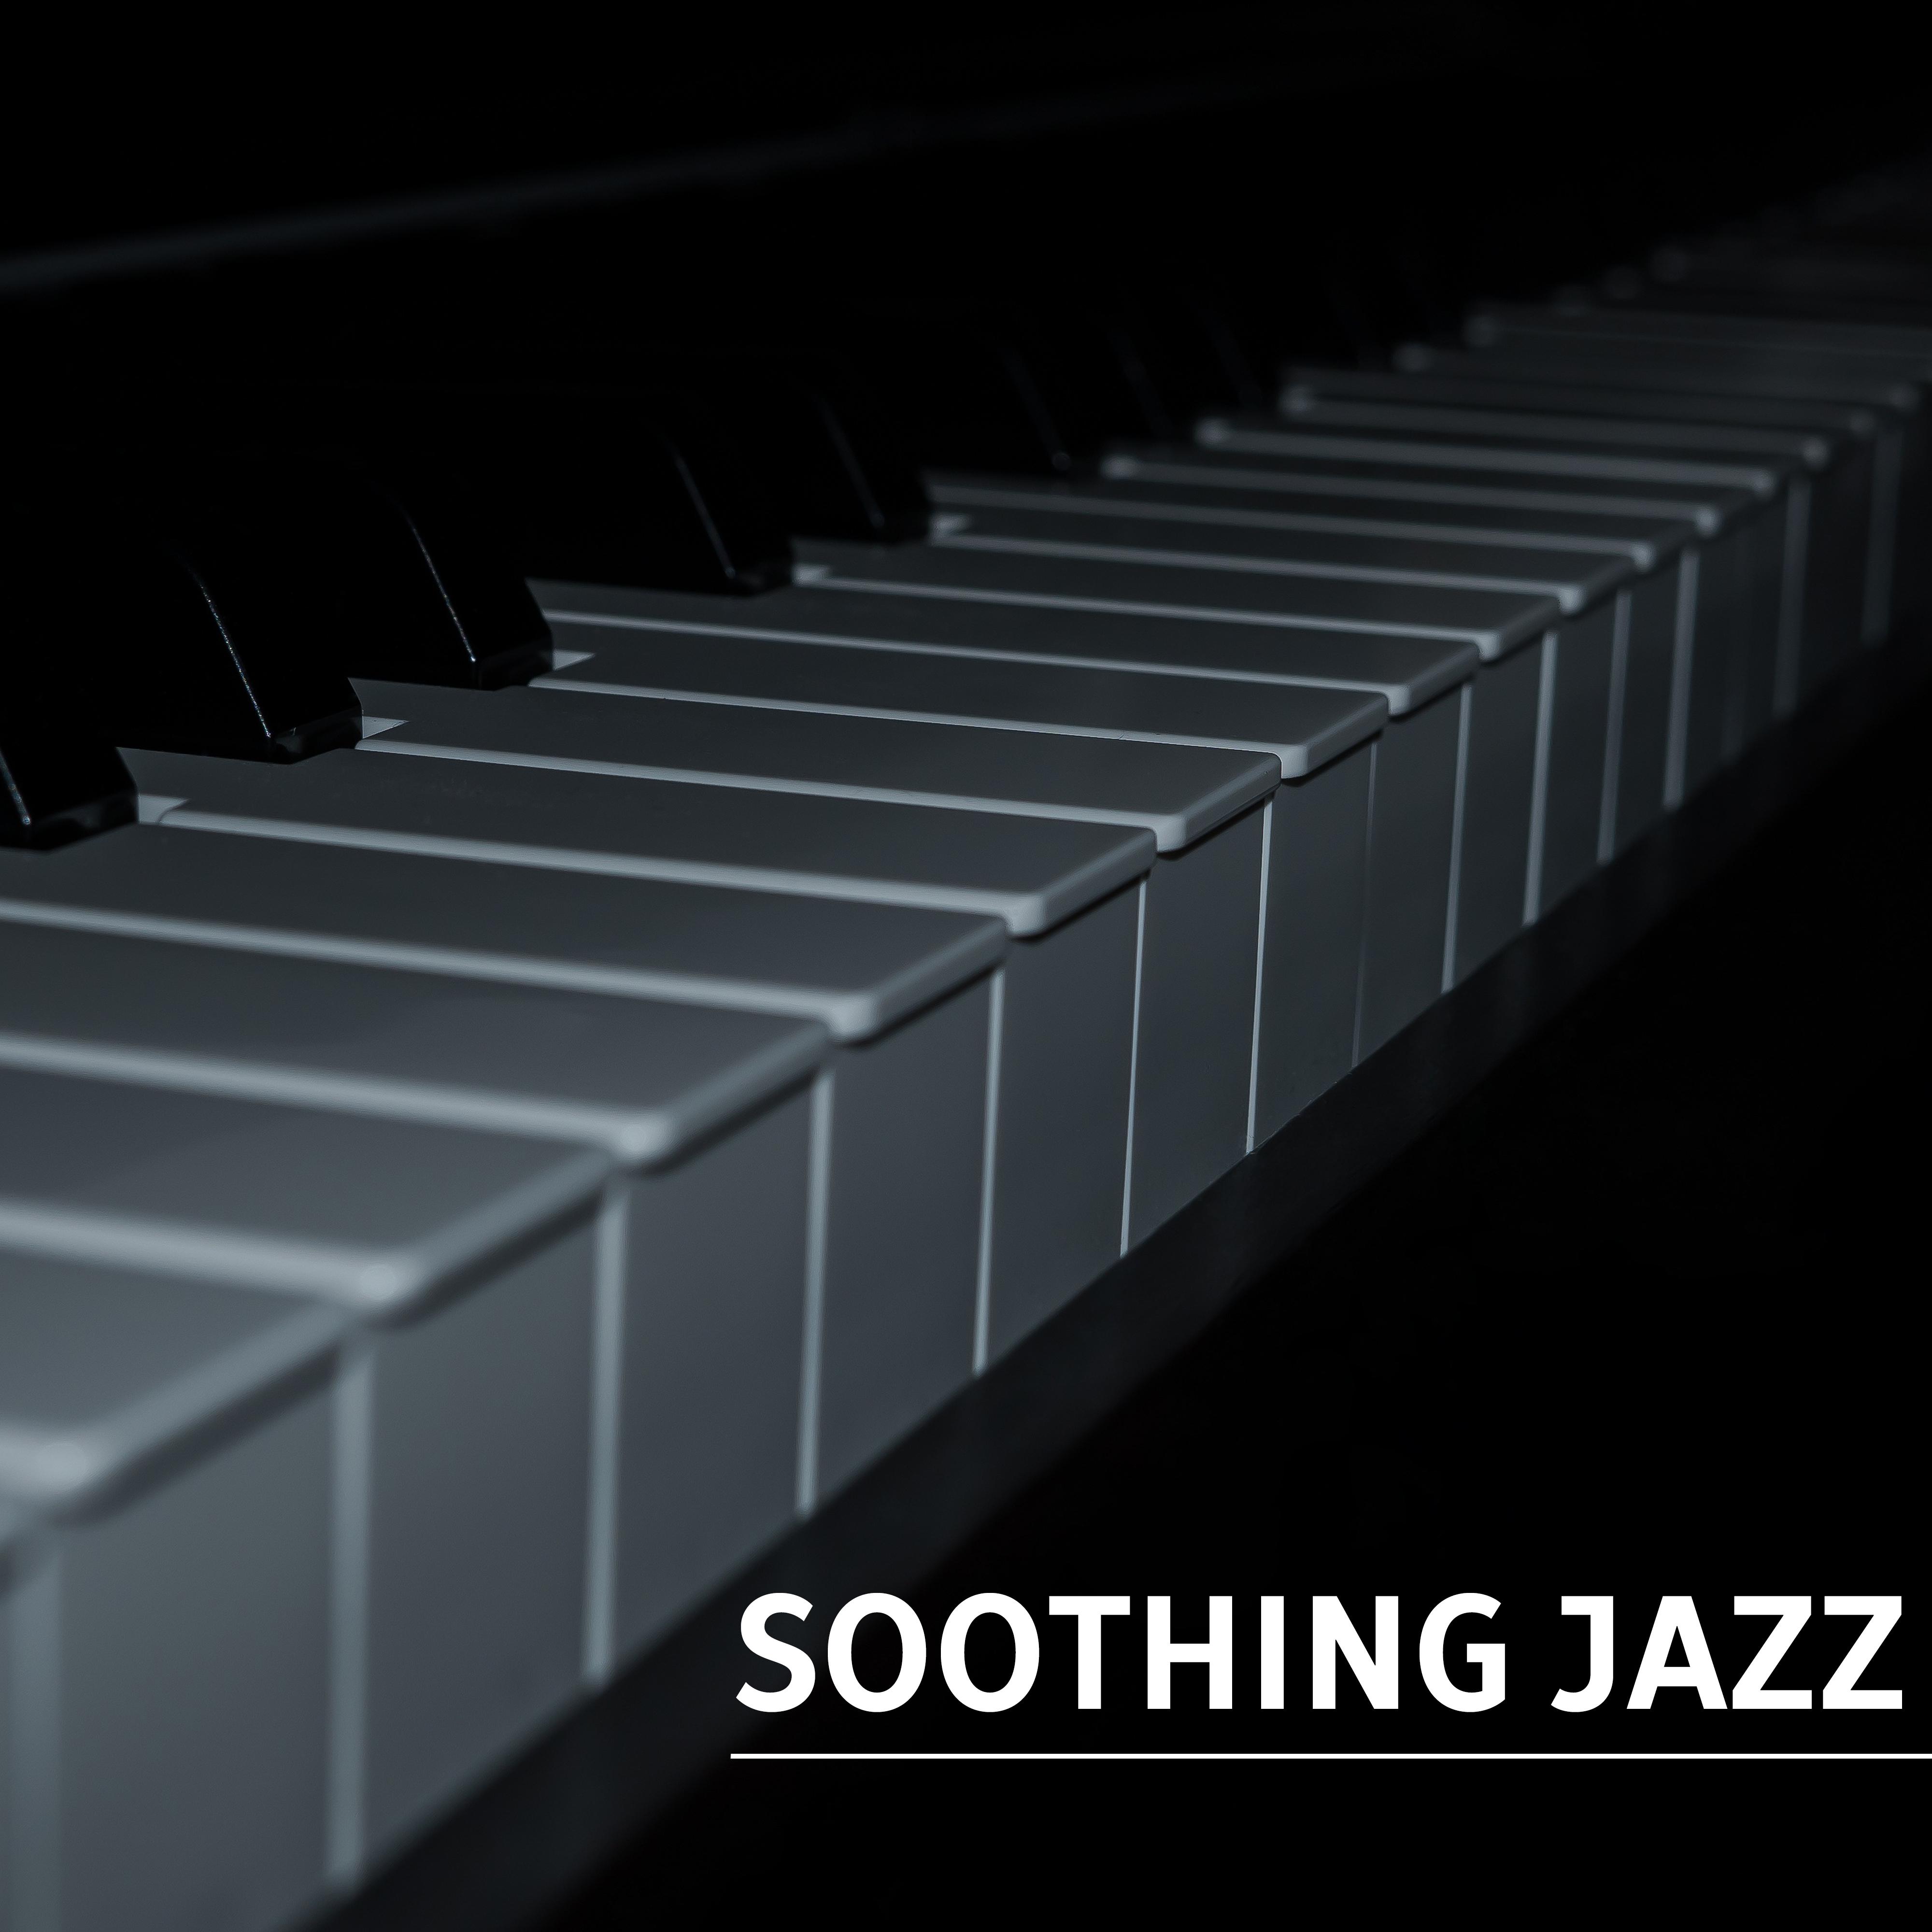 Soothing Jazz  Instrumental Music for Relaxation, Smooth Jazz, Easy Listening, Piano Jazz, Gentle Guitar, Chilled Jazz